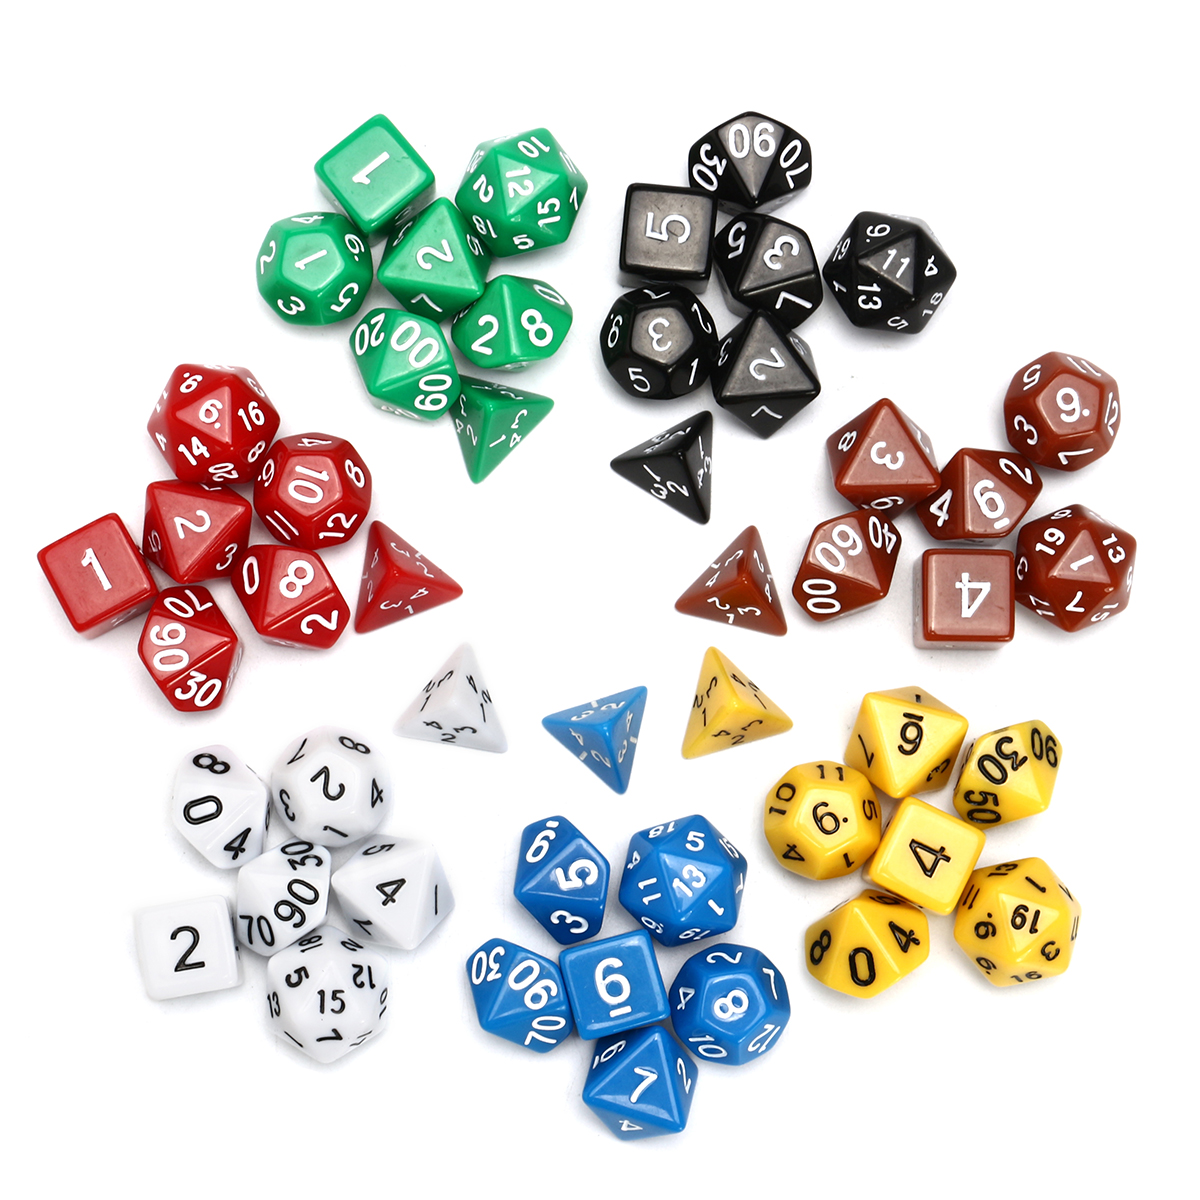 

7 Set 49Pcs Polyhedral TRPG Game Dungeons And Dragons Dice DnD RPG With Bag